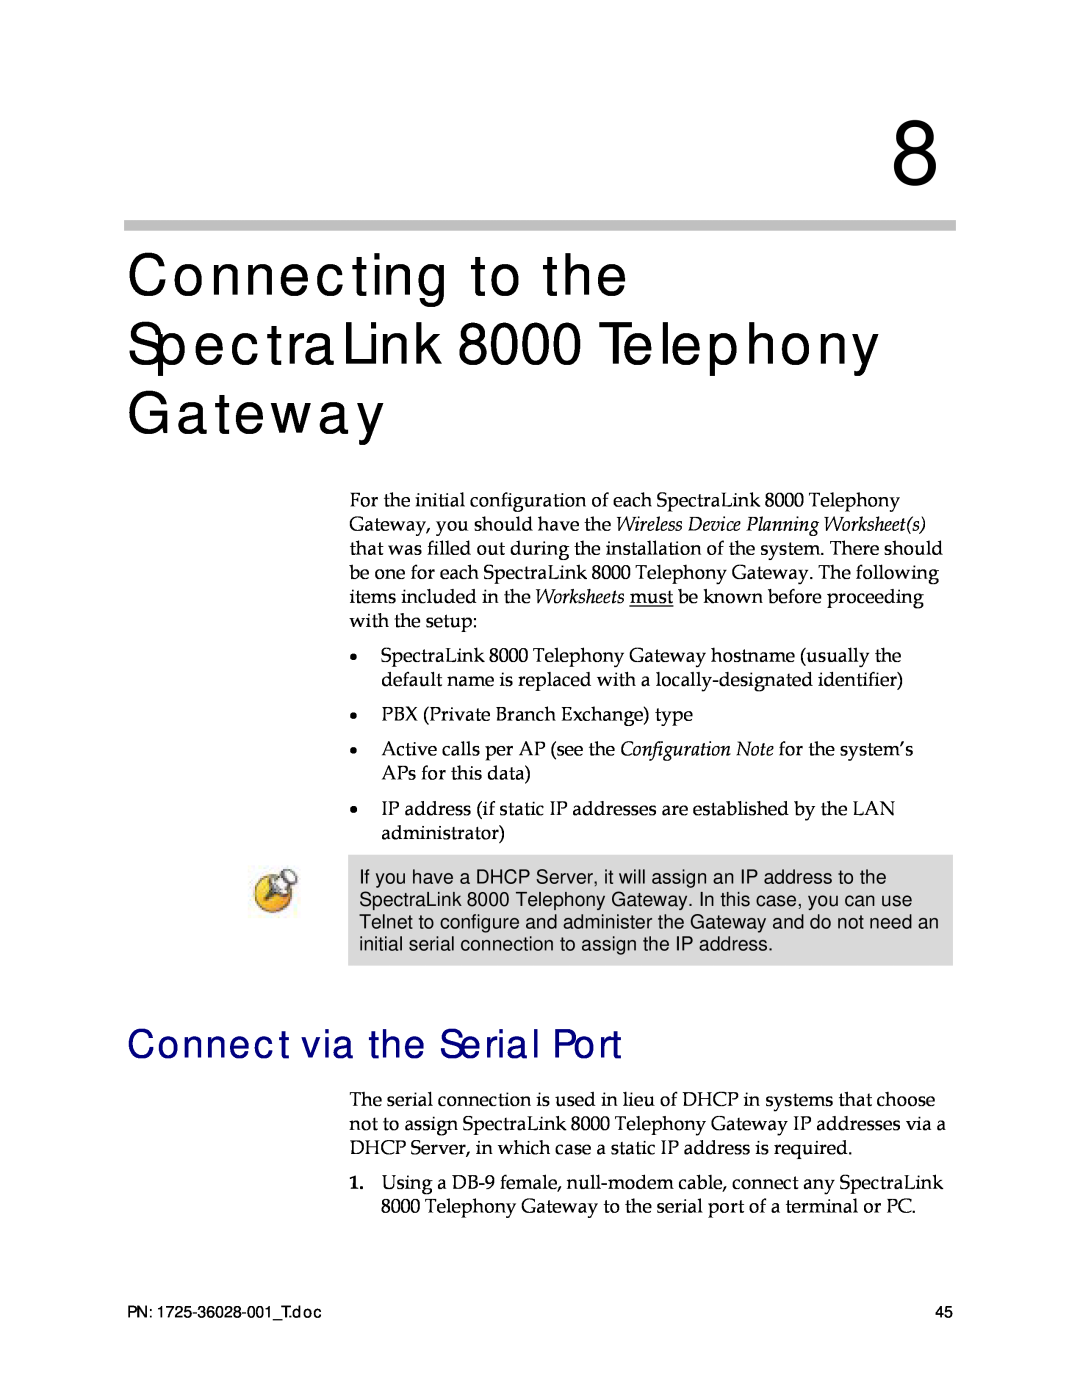 Polycom 1725-36028-001 manual Connecting to the SpectraLink 8000 Telephony Gateway, Connect via the Serial Port 